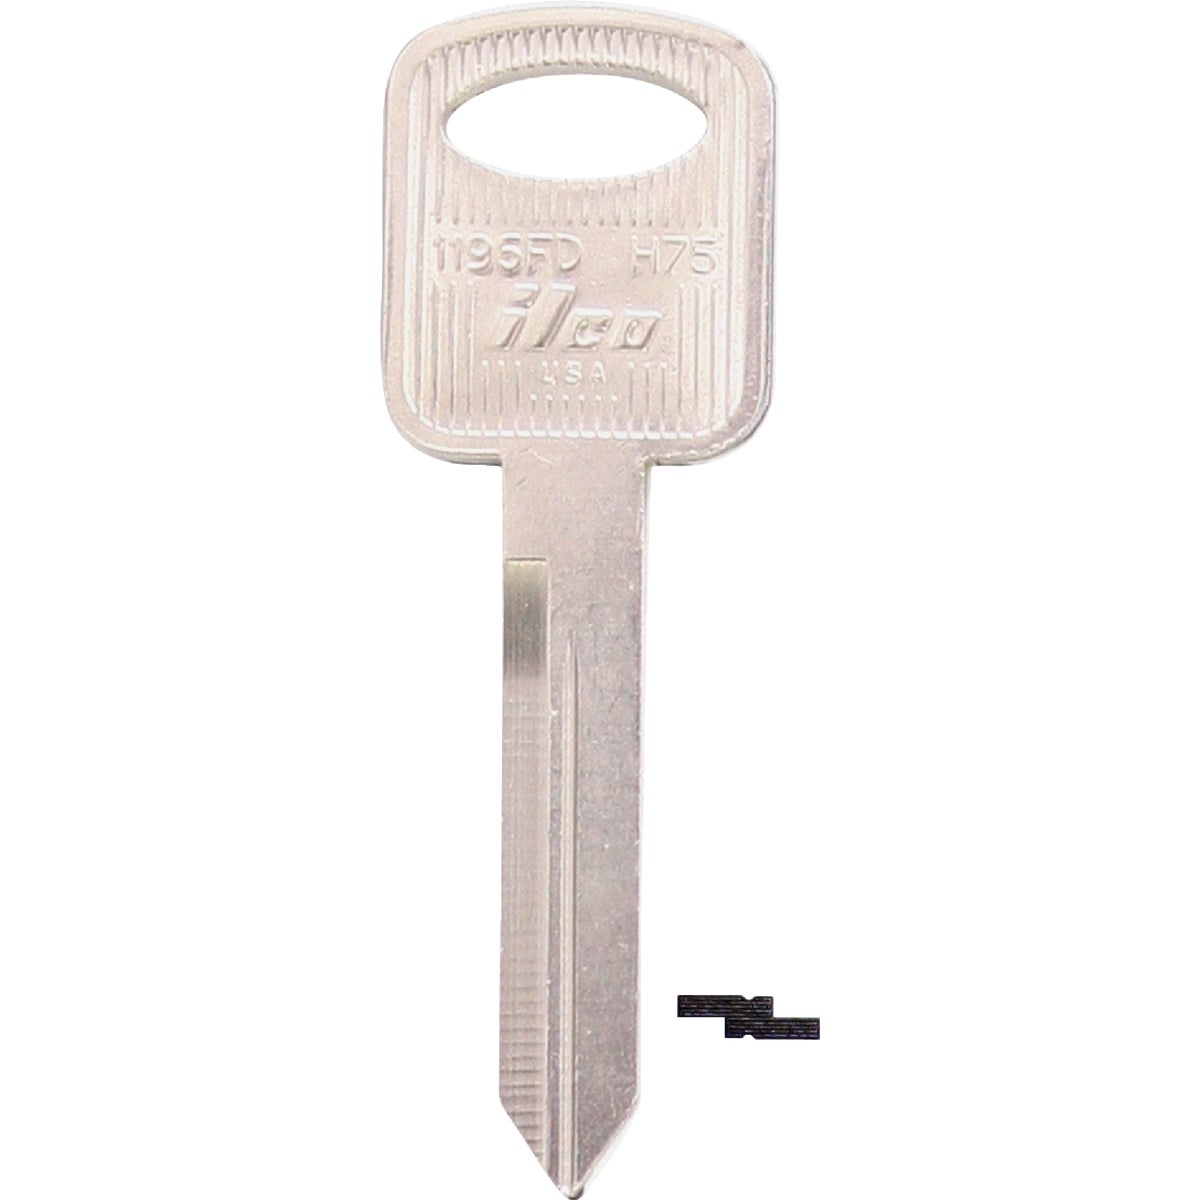 ILCO Ford Nickel Plated Automotive Key, H75 / 1196FD (10-Pack)